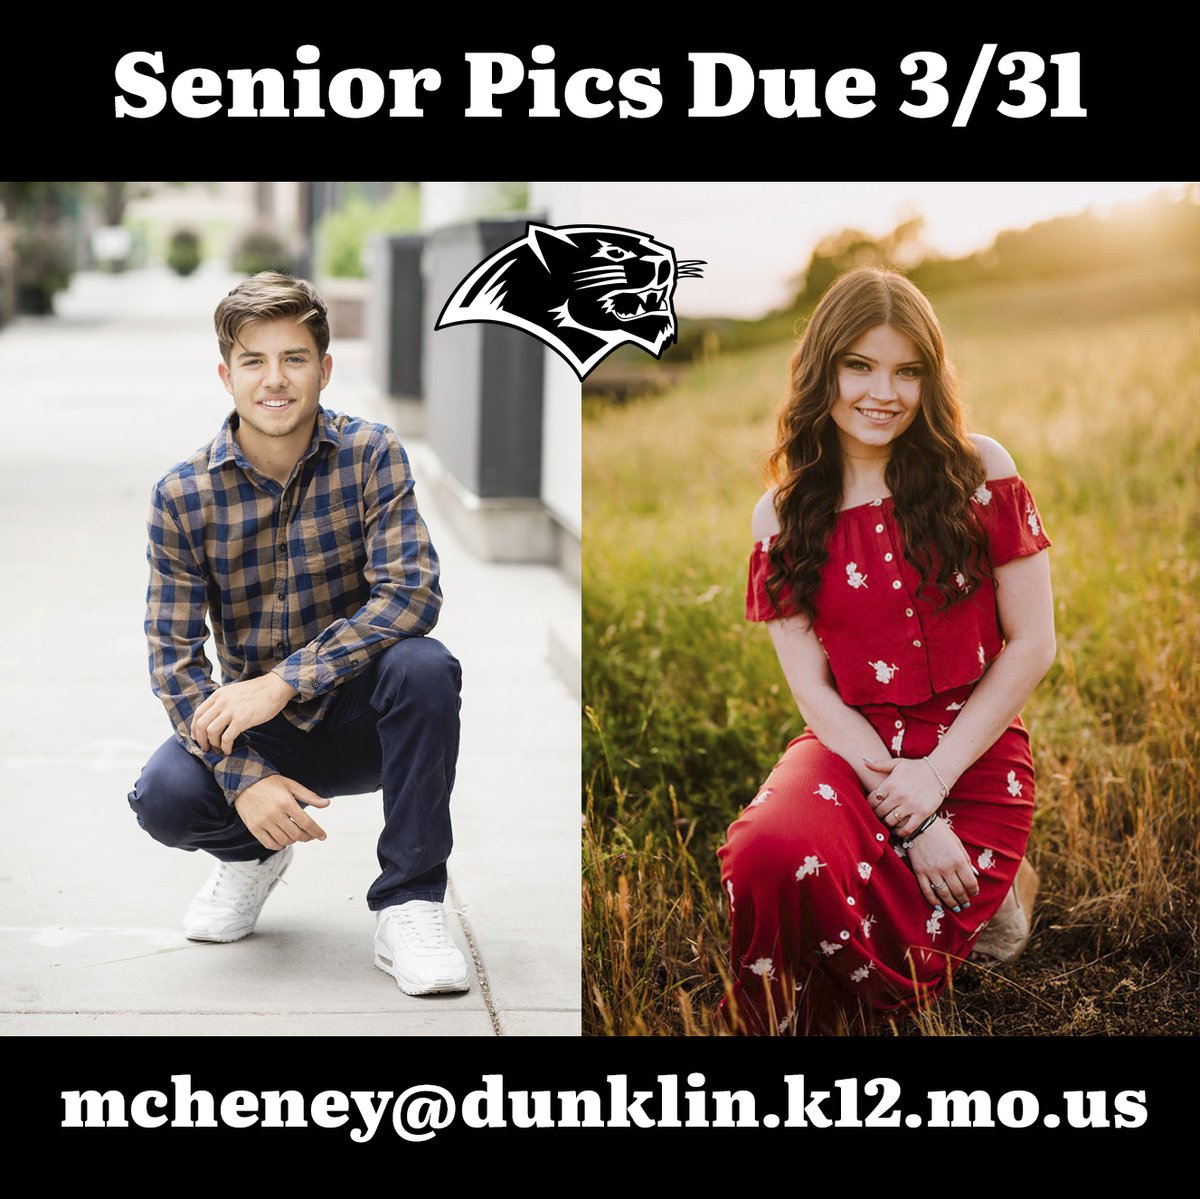 Herculaneum Seniors - Don't forget to email your senior picture to Mr. Cheney by the end of the month. #GoBlackcats @HHSBlackcats @dix_stephanie @BlackcatUpdates @DrClintFreeman @TheMrCheney